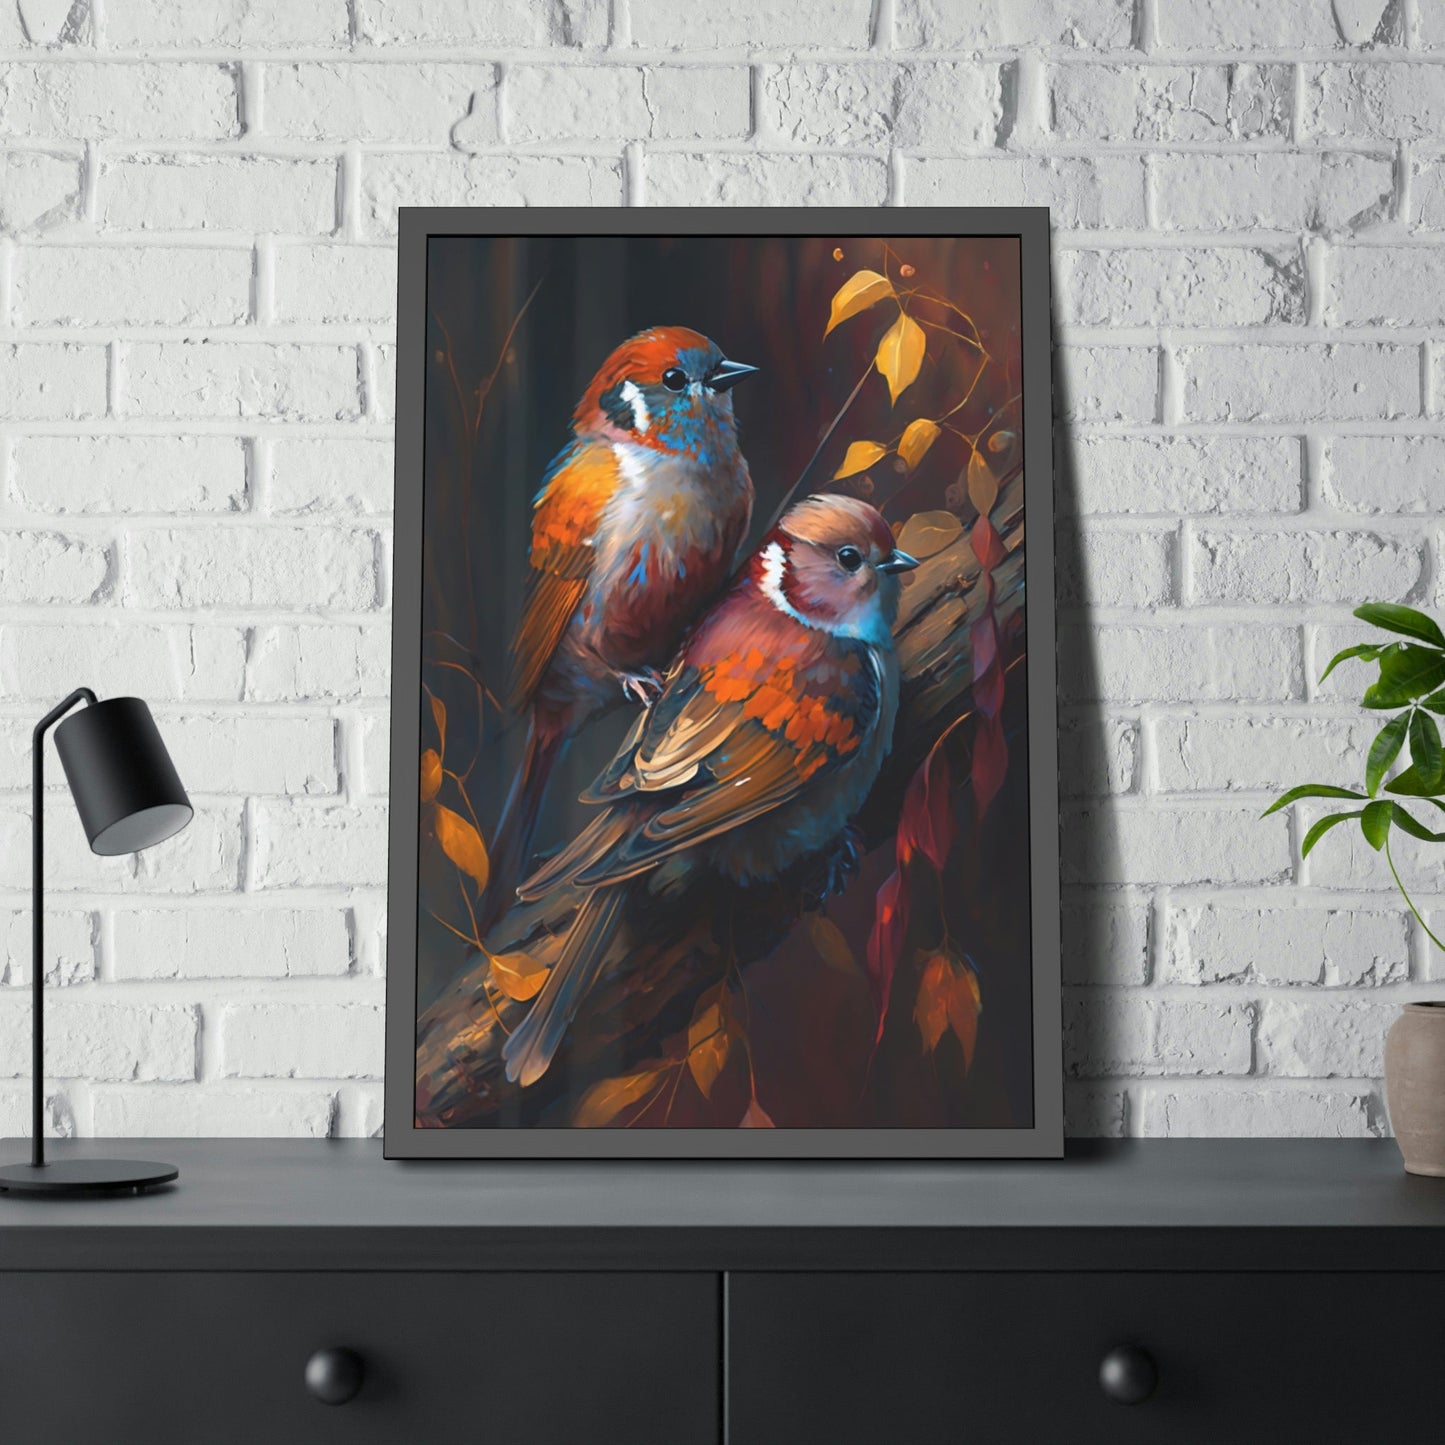 The Birds' Haven: Canvas Wall Art of Birds in a Protected Habitat